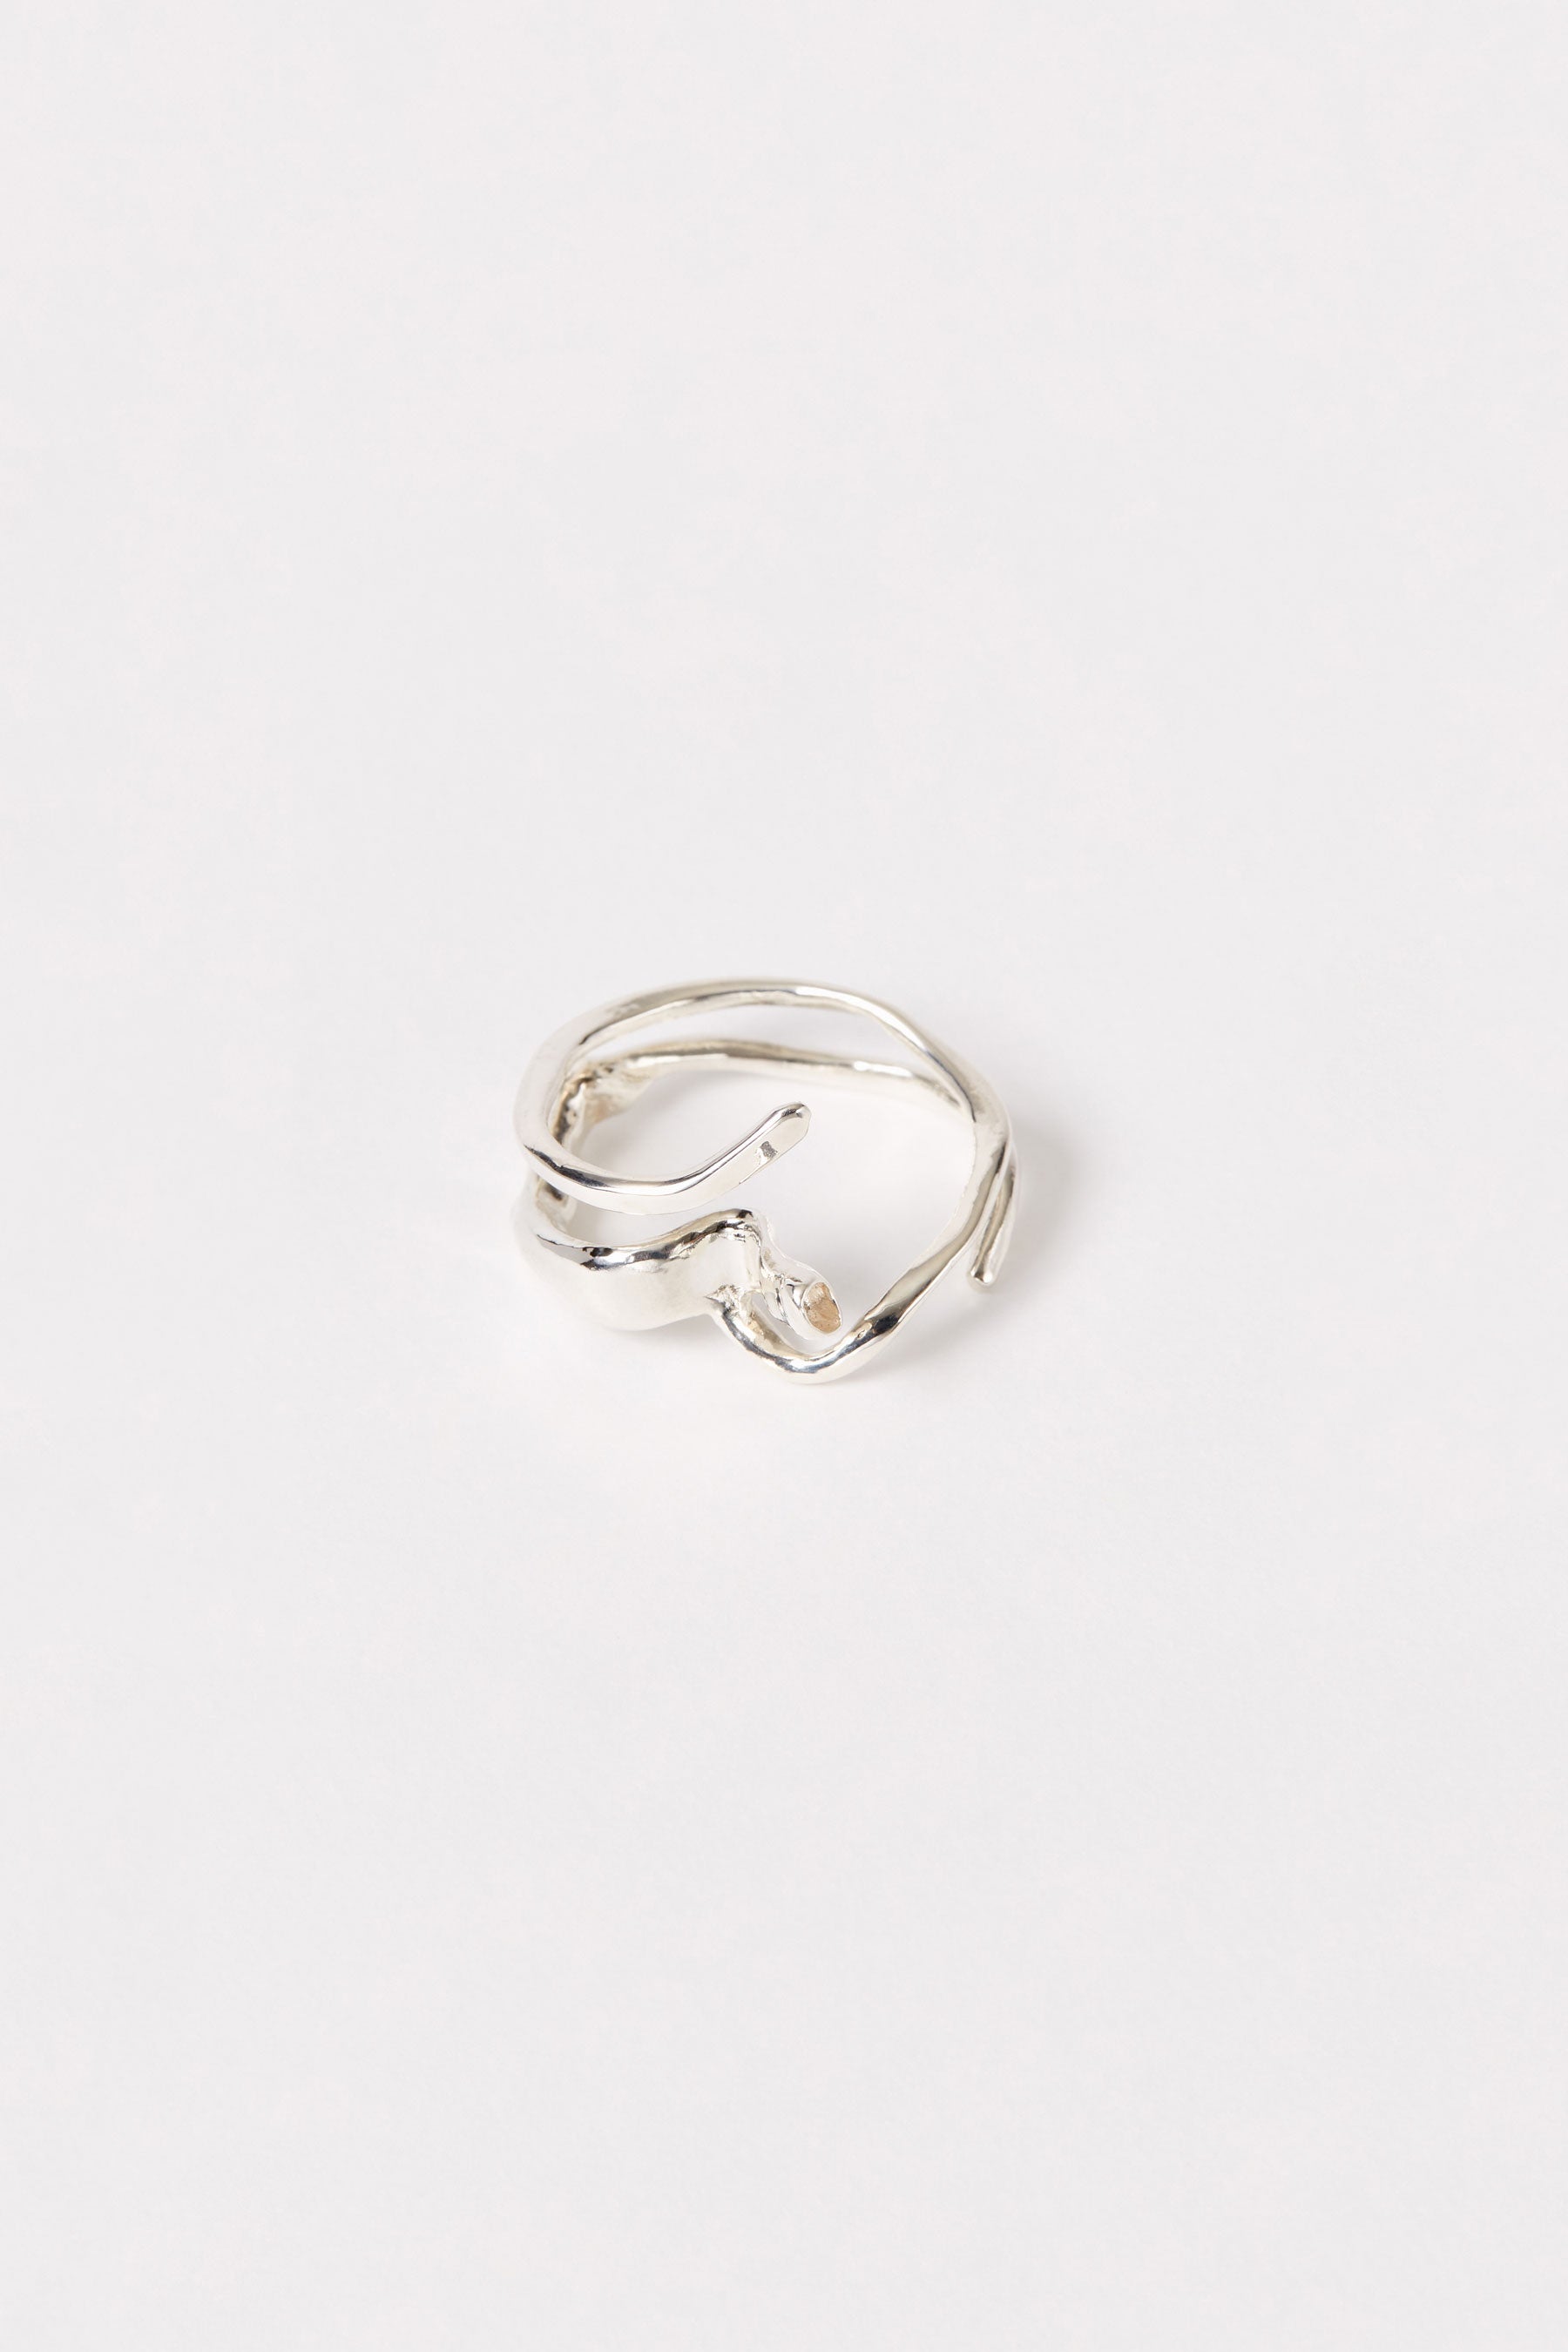 Hammer-crafted Spiral Silver Shirt Ring 002